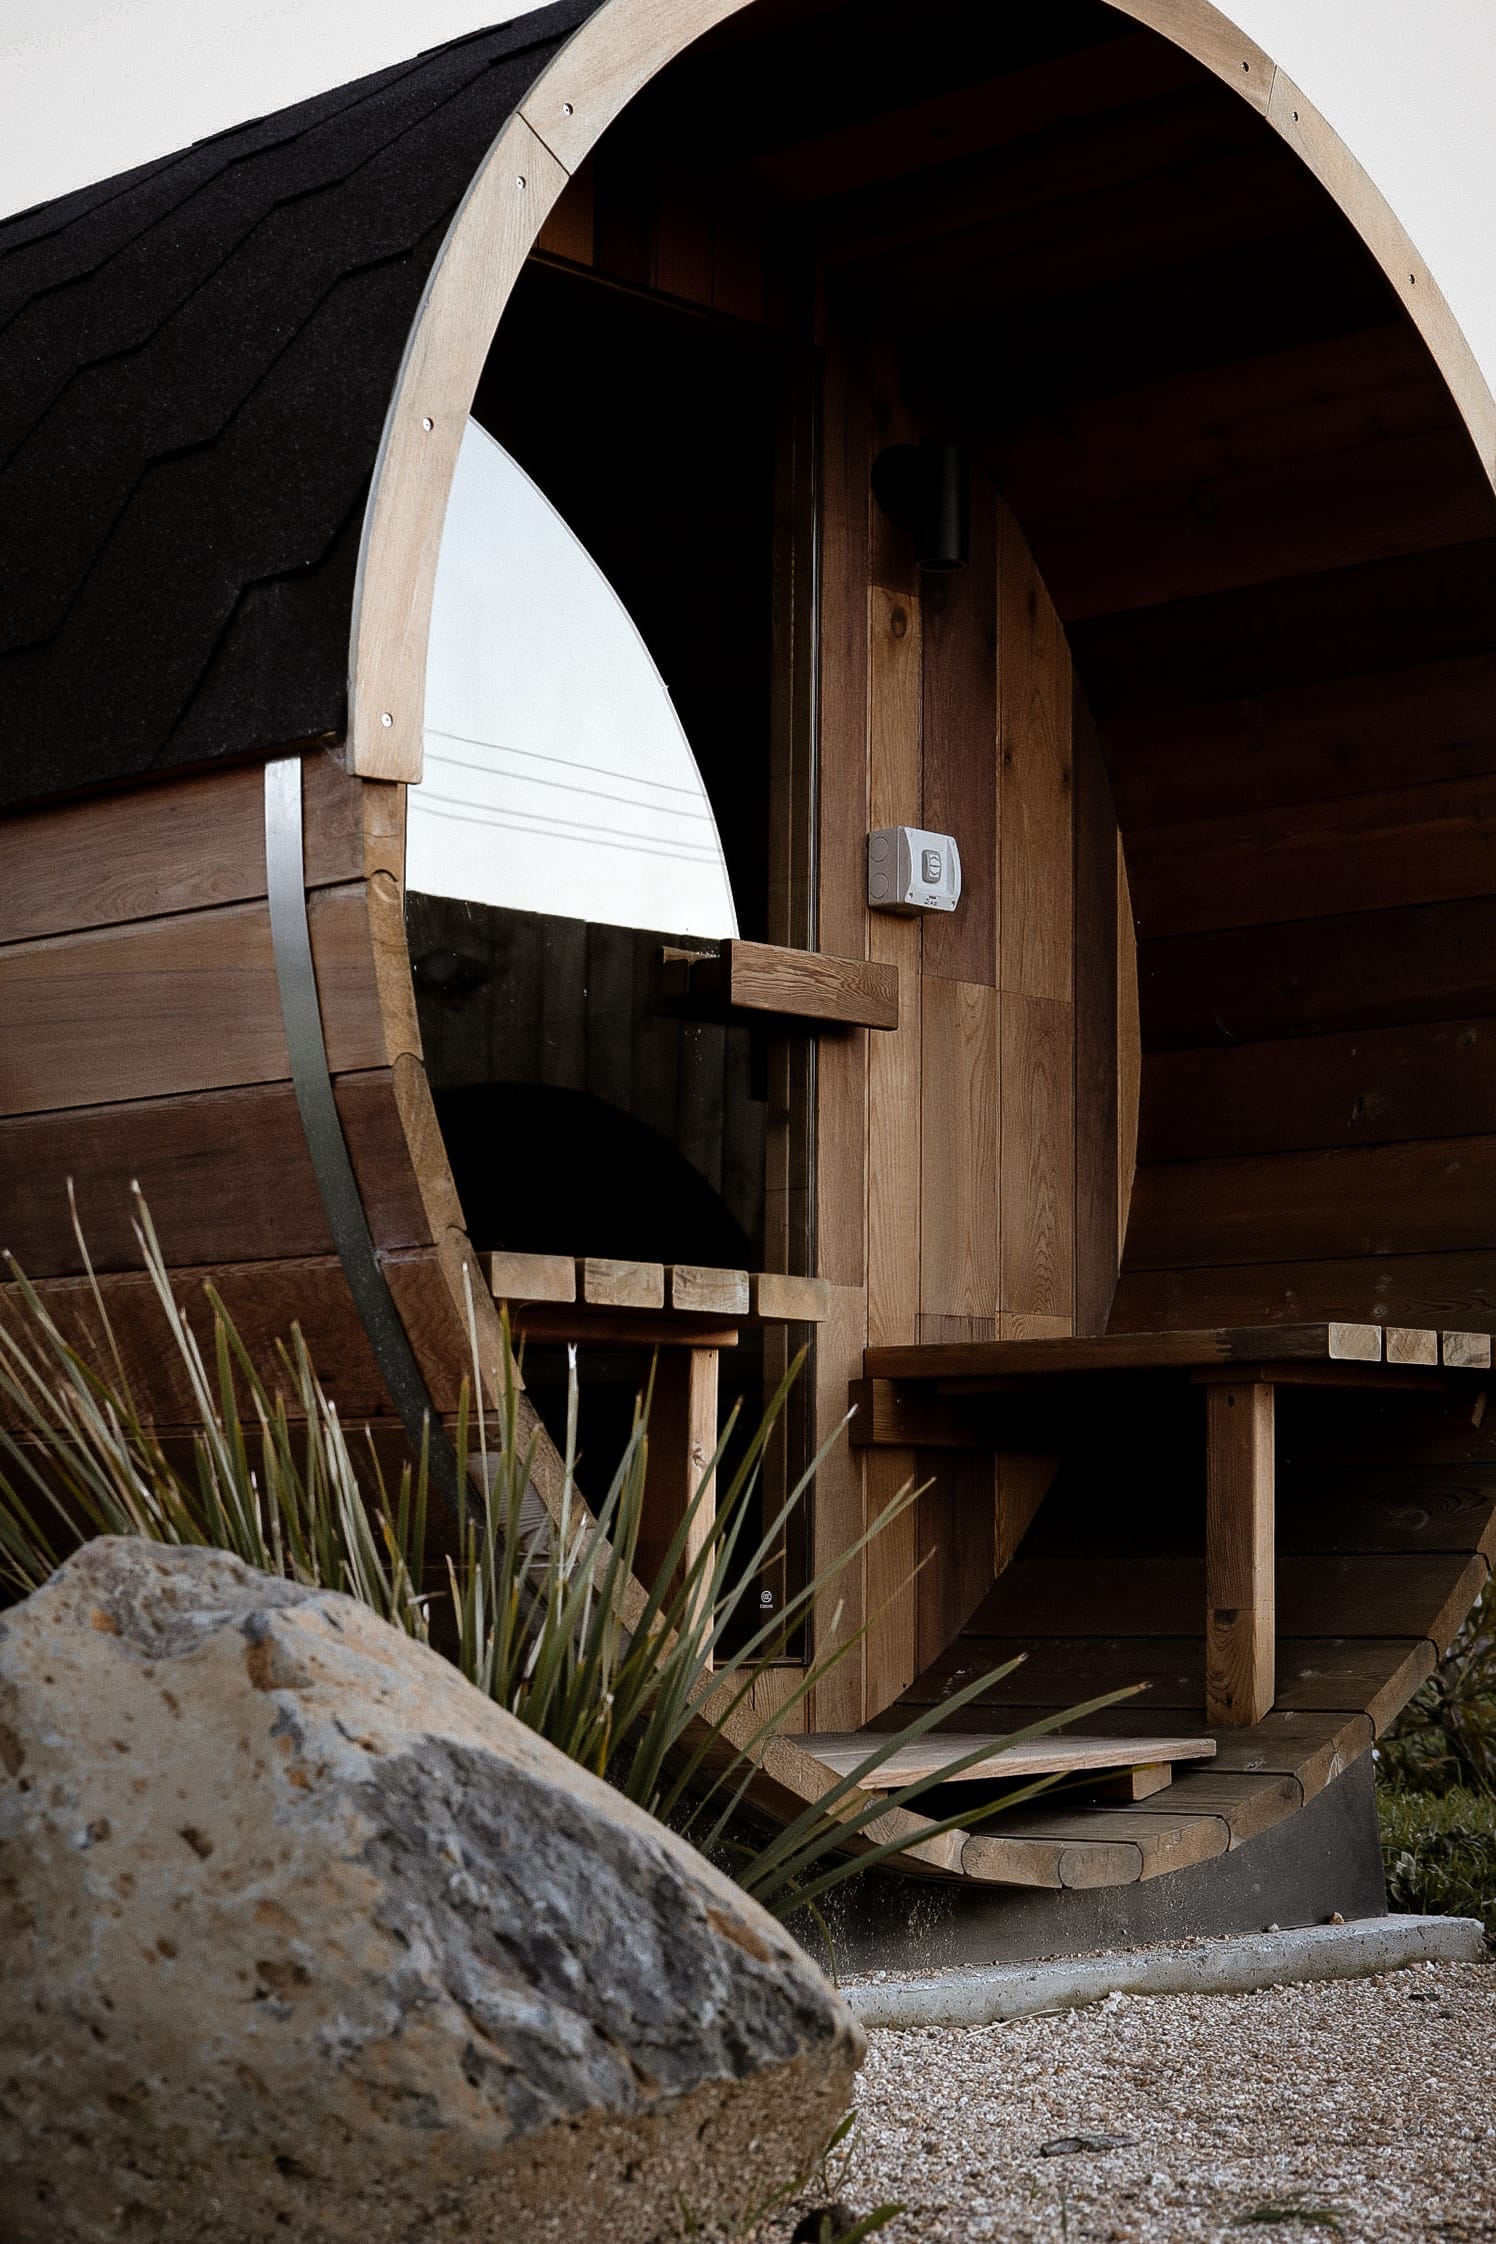 Just Down the Road. Photographer: Studio Winslow.Close-up view of the entrance to a barrel-shaped wooden sauna with an arched opening, revealing the interior benches and wooden structures, positioned on a gravel surface with a large rock in the foreground.